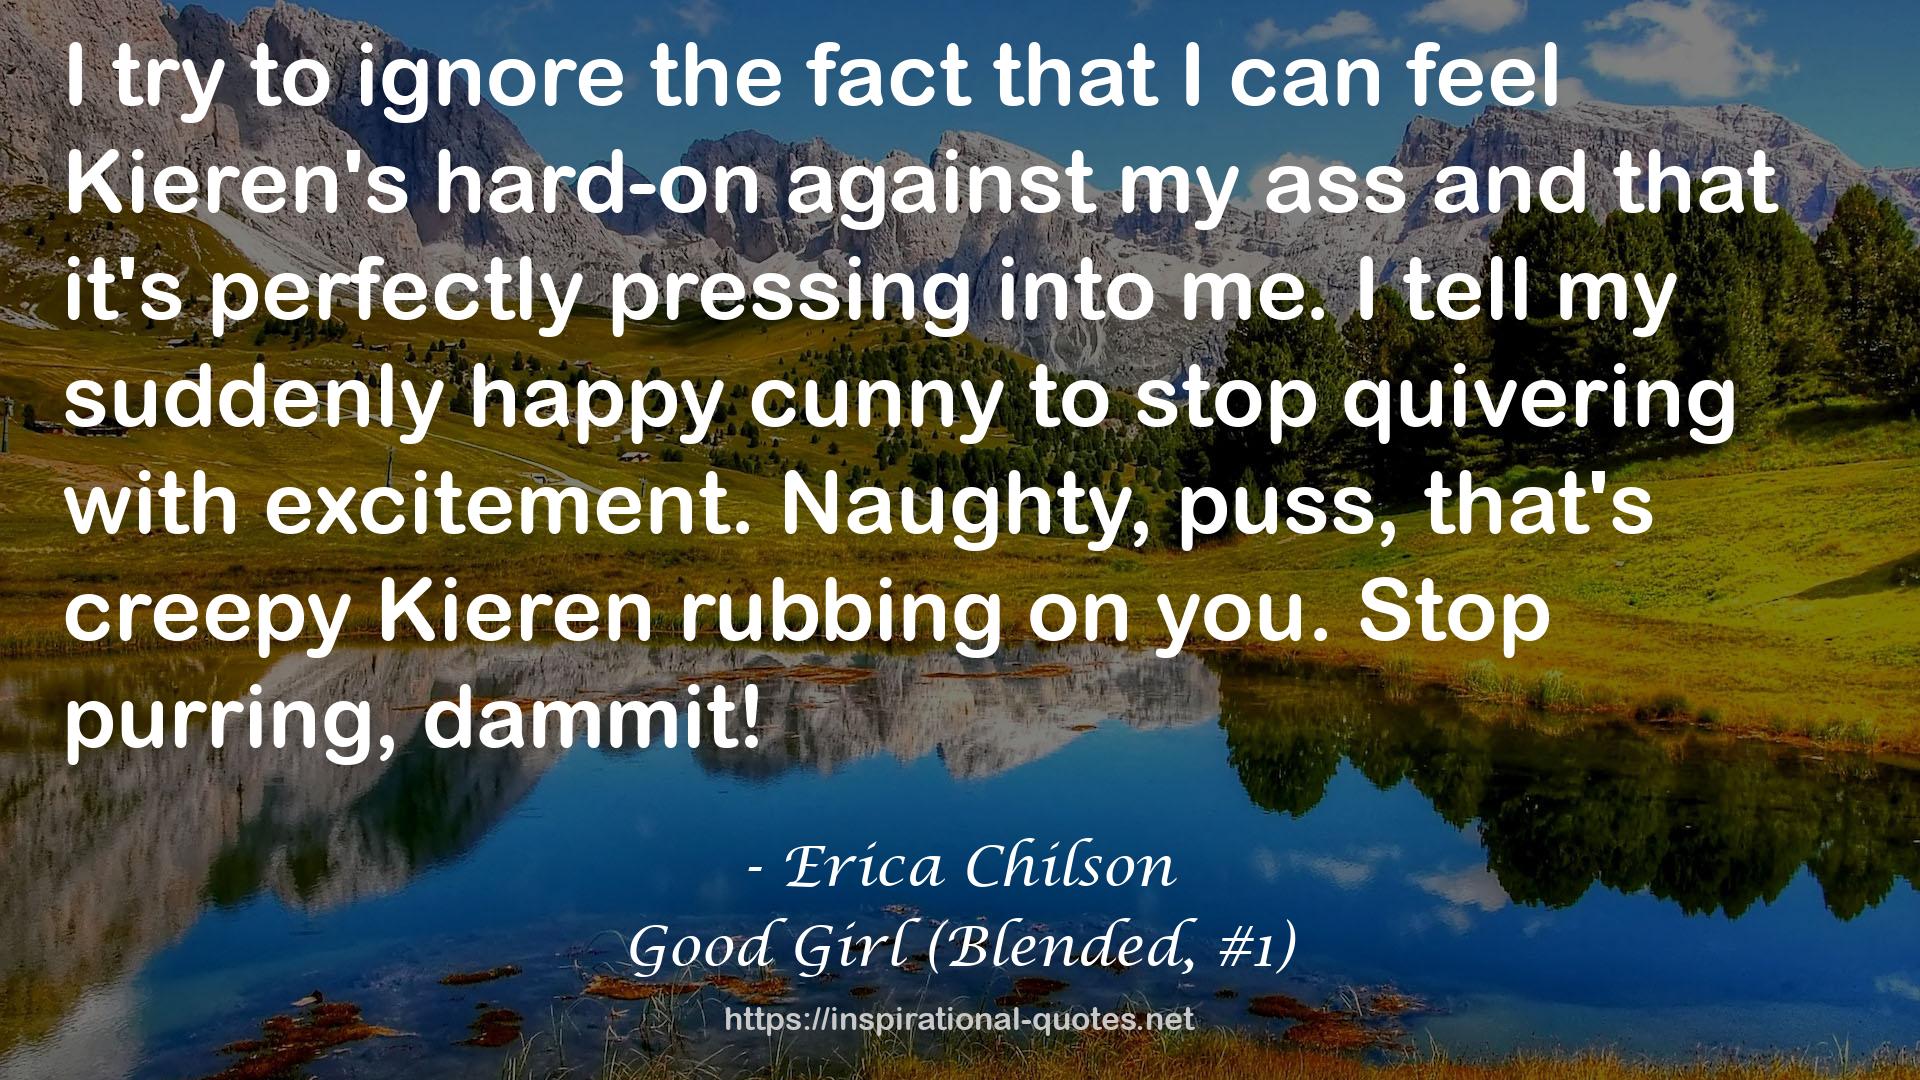 Good Girl (Blended, #1) QUOTES